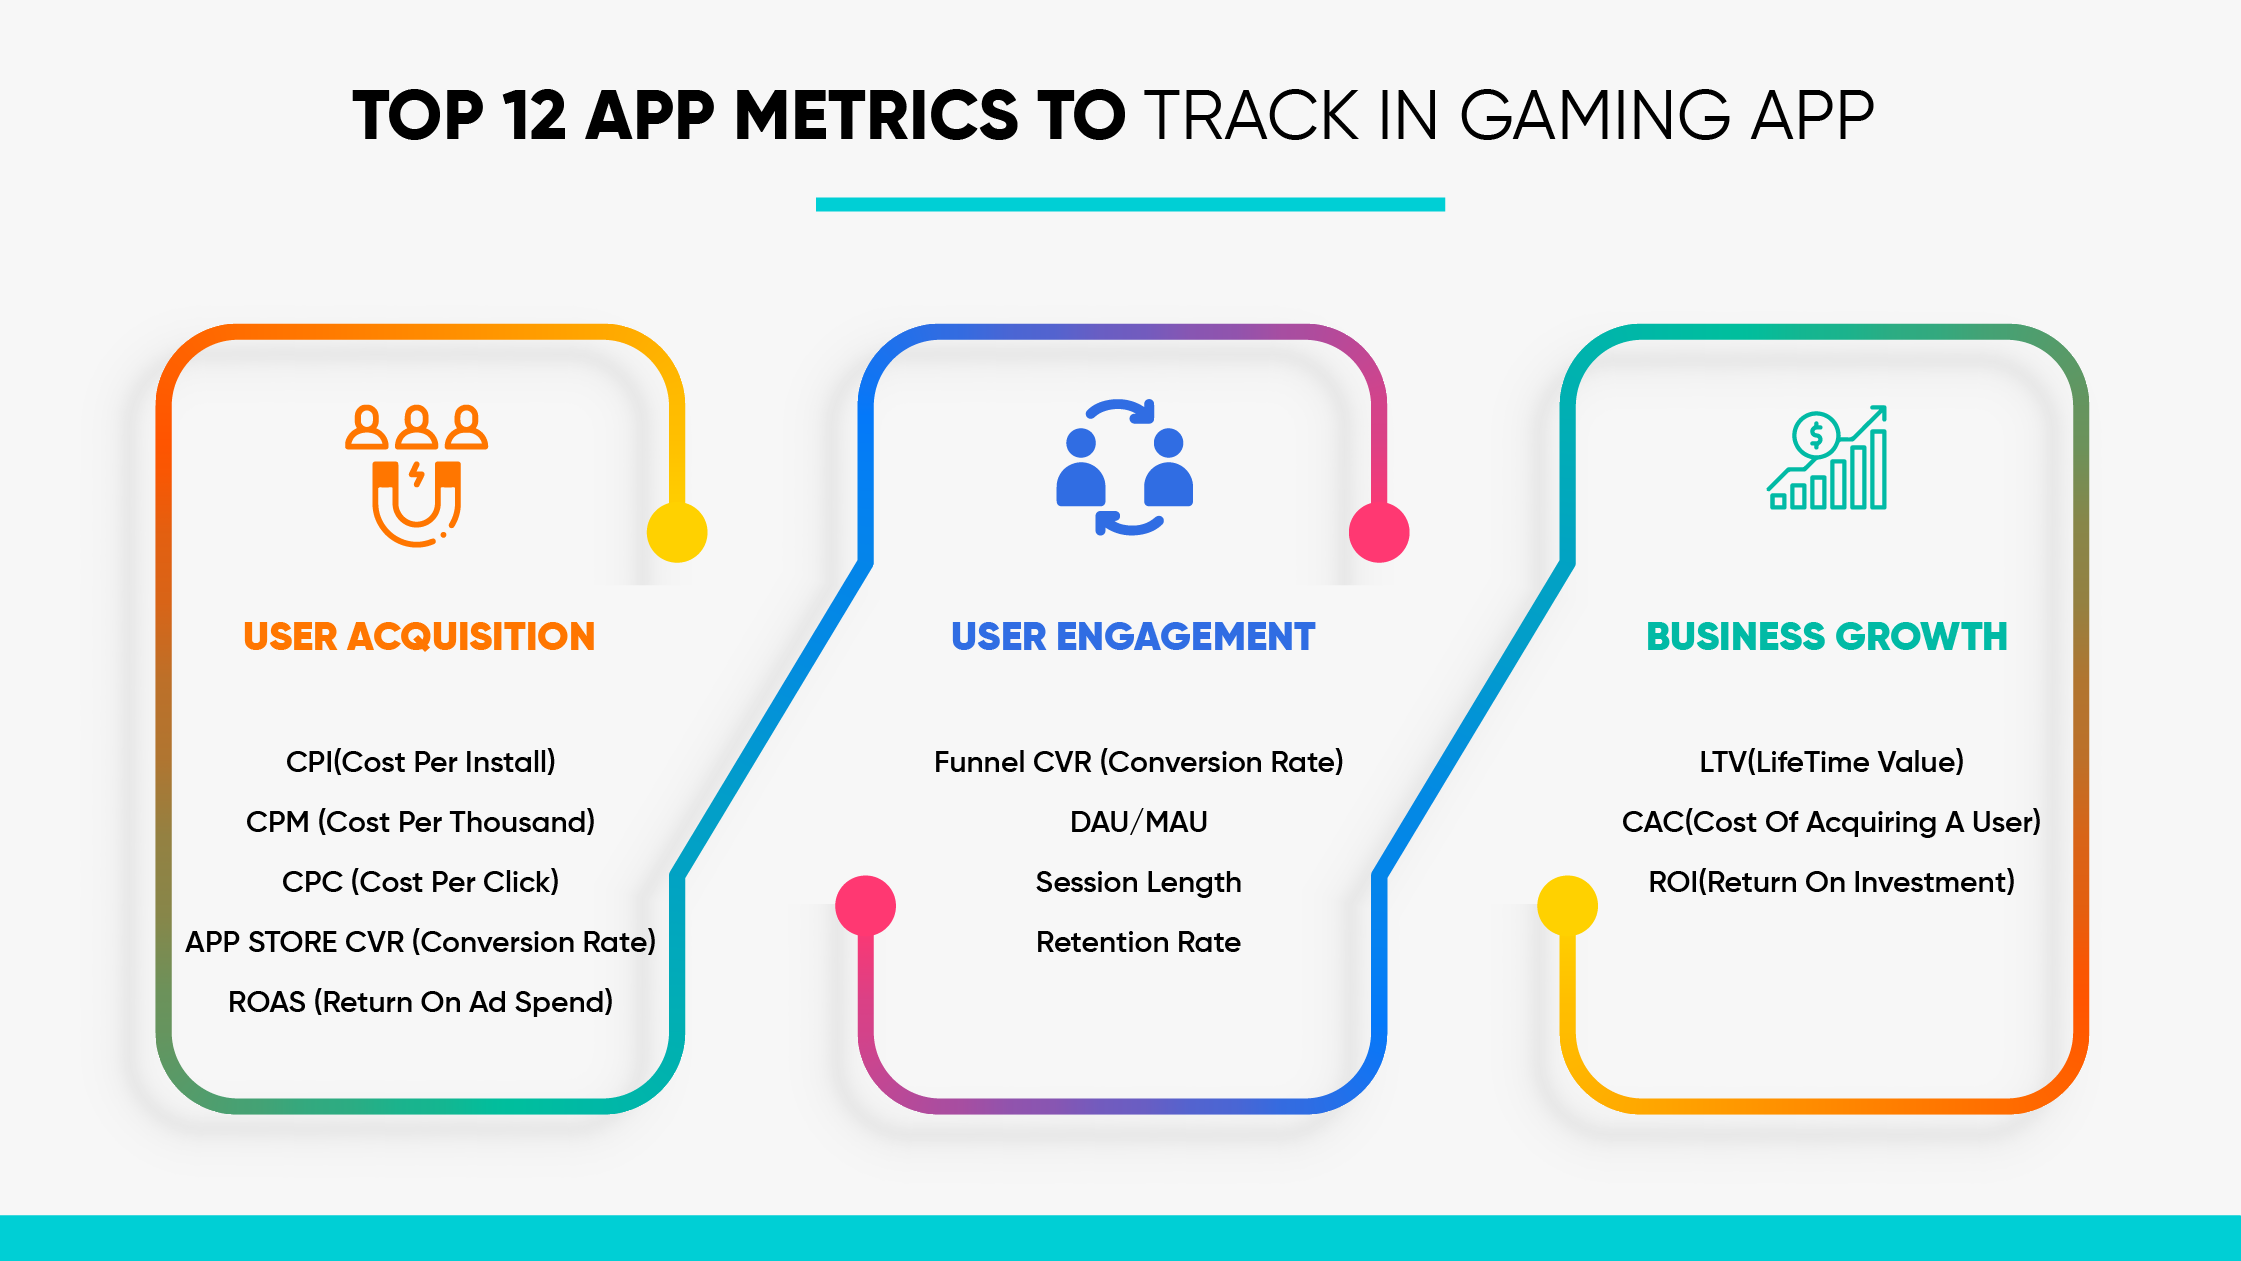 Important Metrics To Track In Gaming Apps